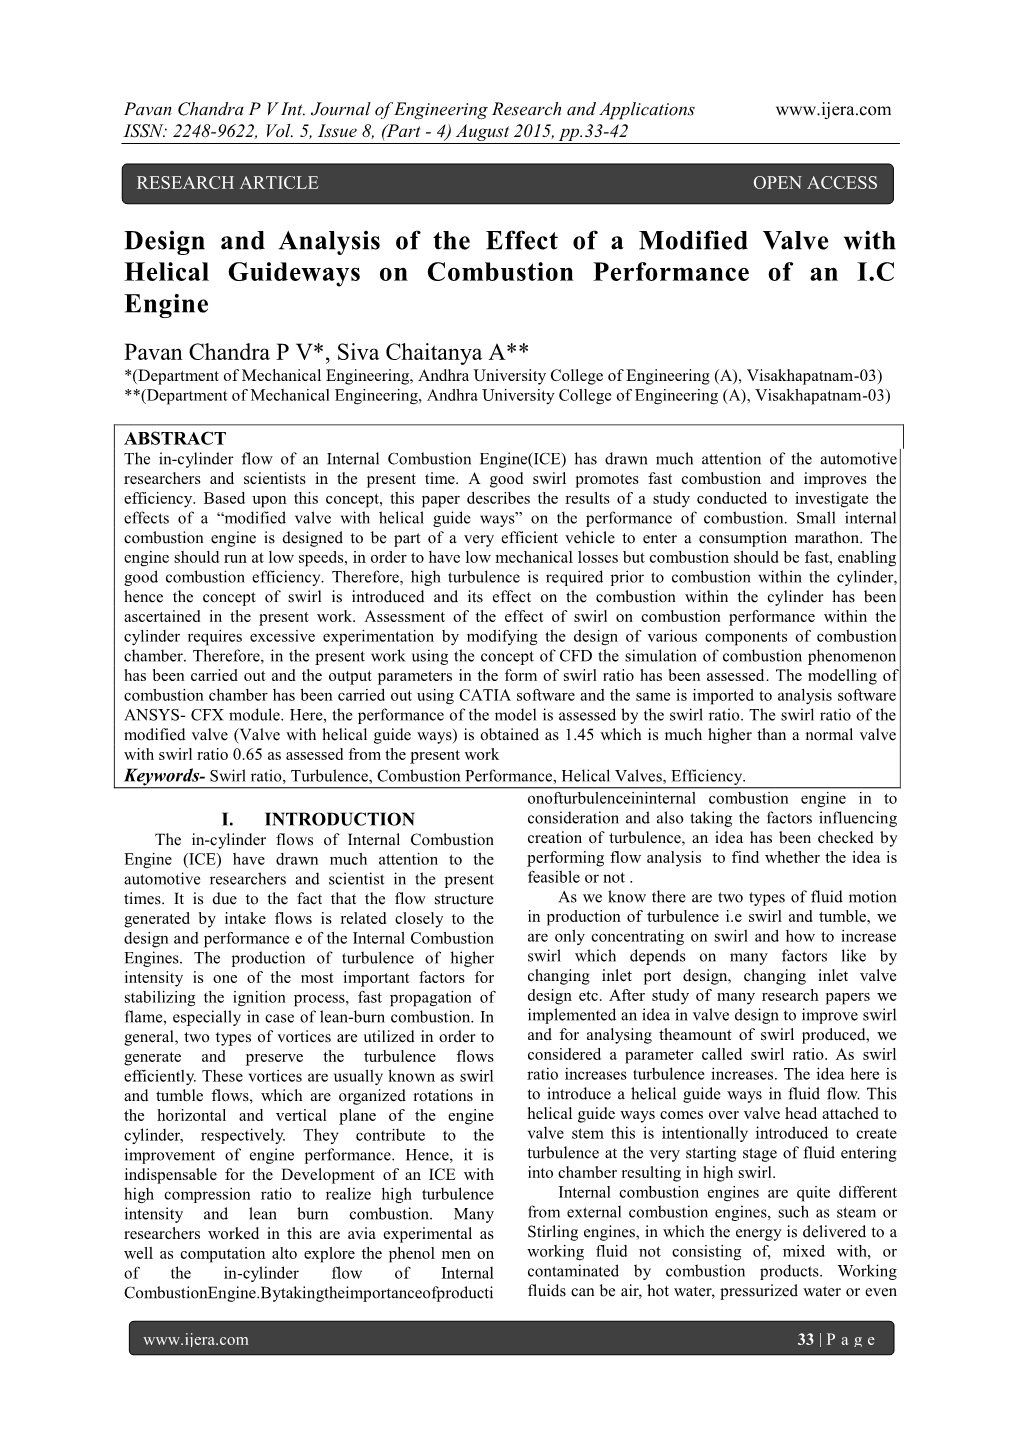 Design and Analysis of the Effect of a Modified Valve with Helical Guideways on Combustion Performance of an I.C Engine